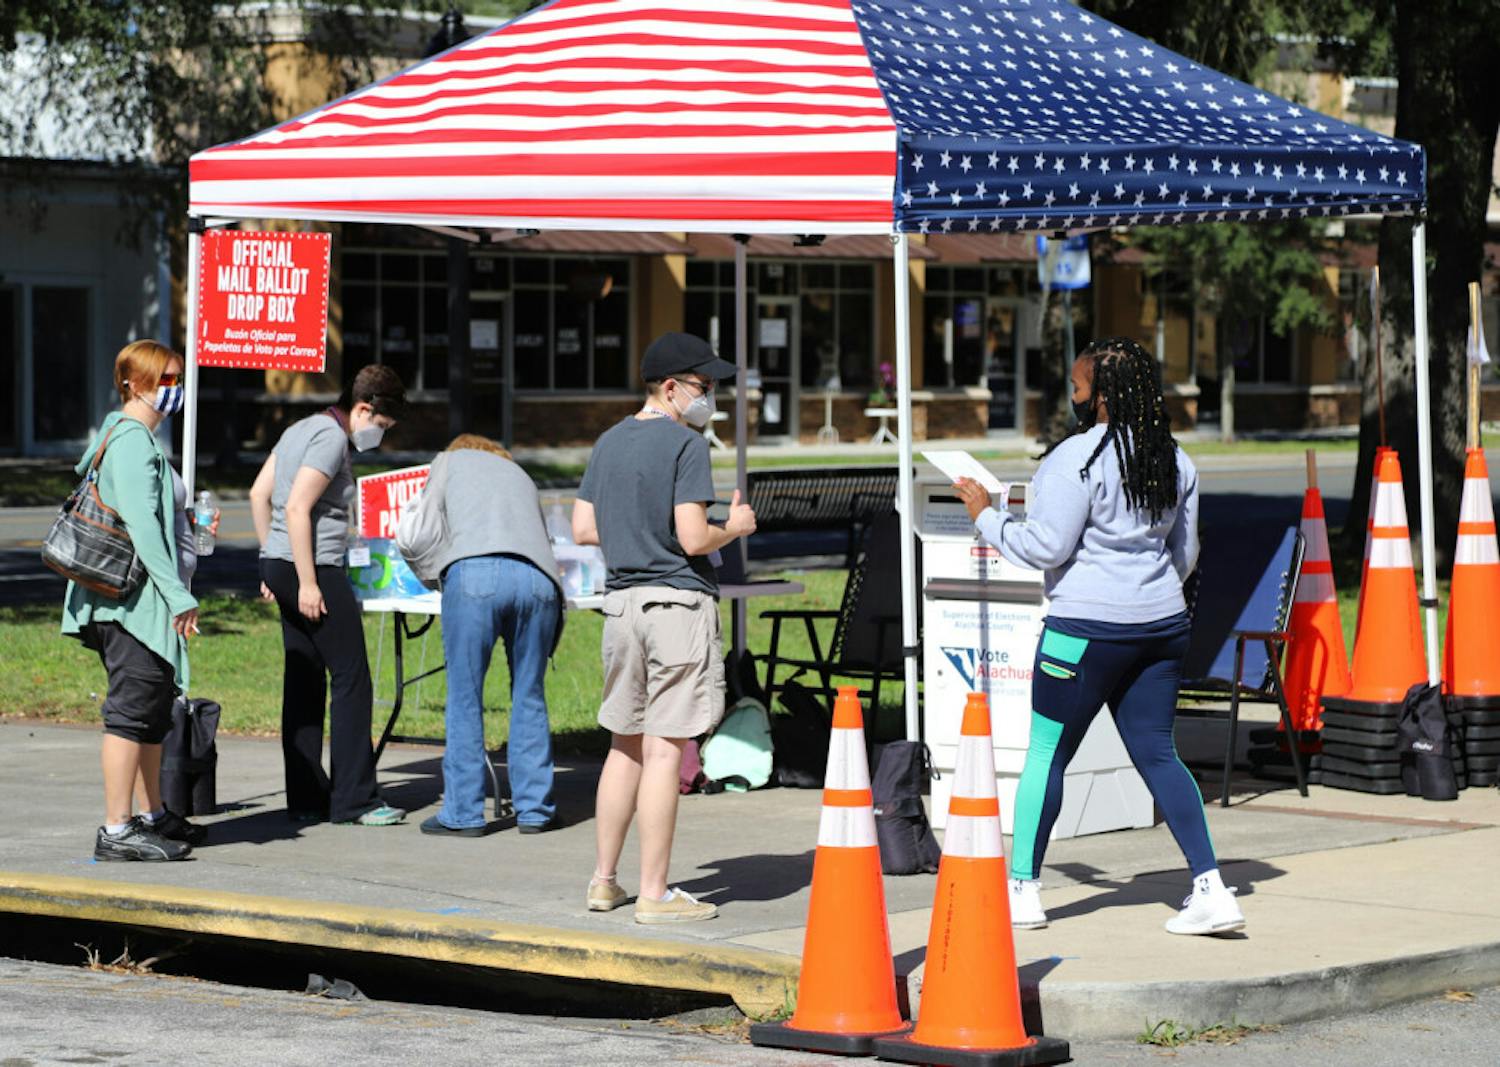 Voters are seen dropping off their mail ballots at the Supervisor of Elections Office in Gainesville, Fla., on Tuesday, Nov. 3, 2020.